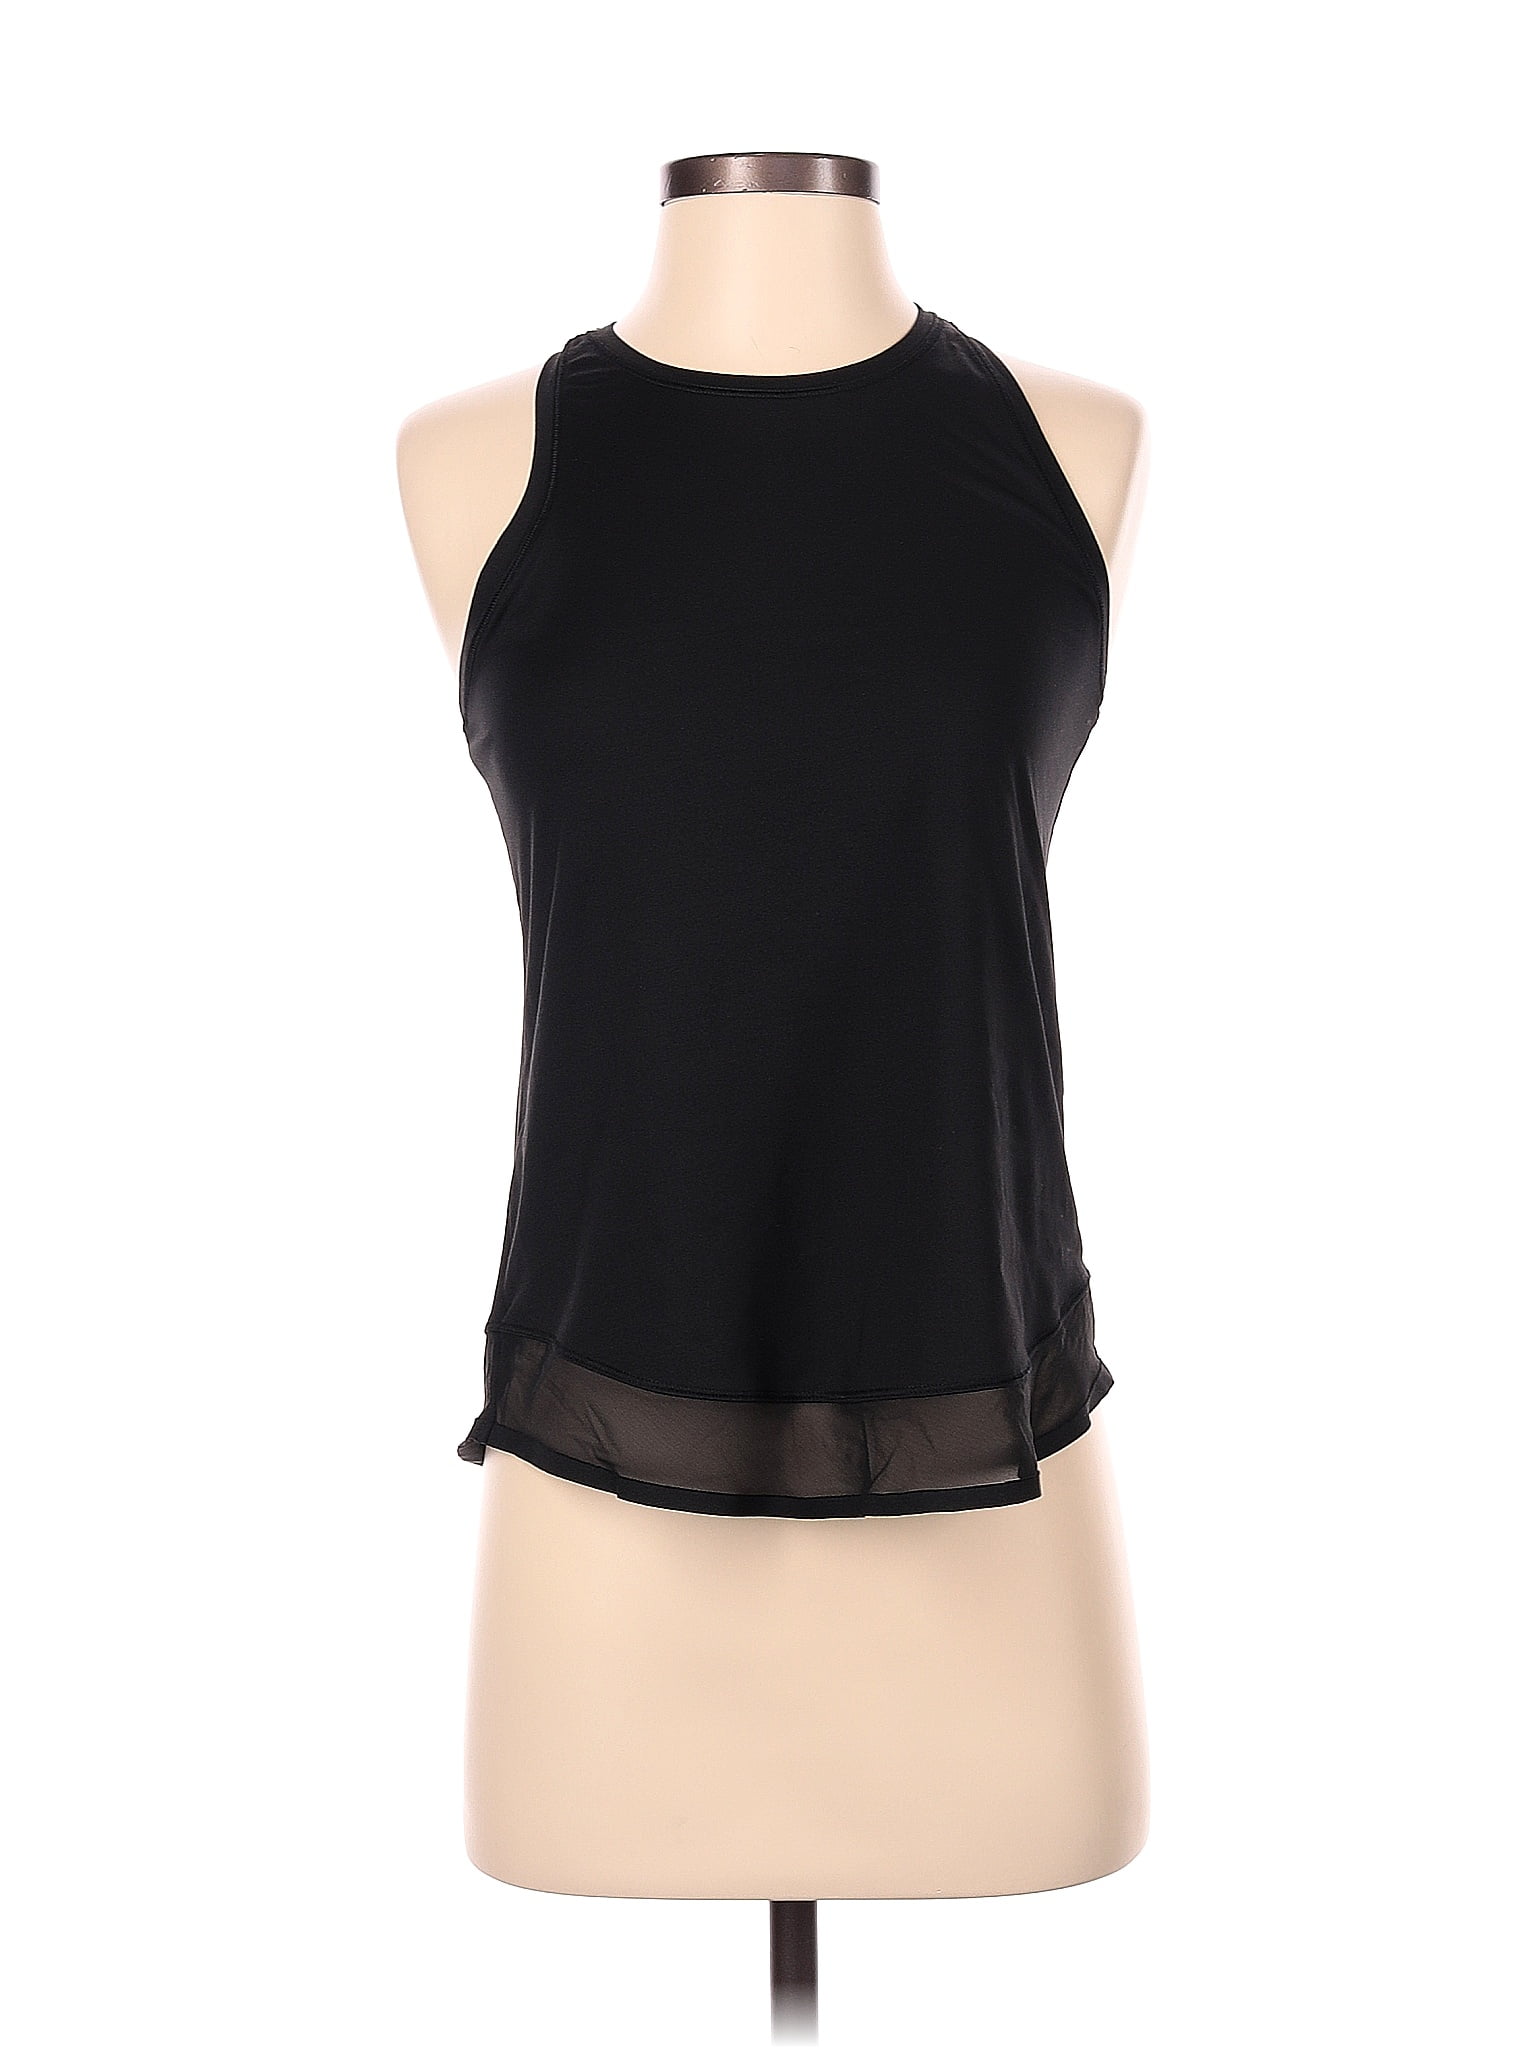 Calia by Carrie Underwood Black Active Tank Size 3X (Estimated) (Plus) -  64% off